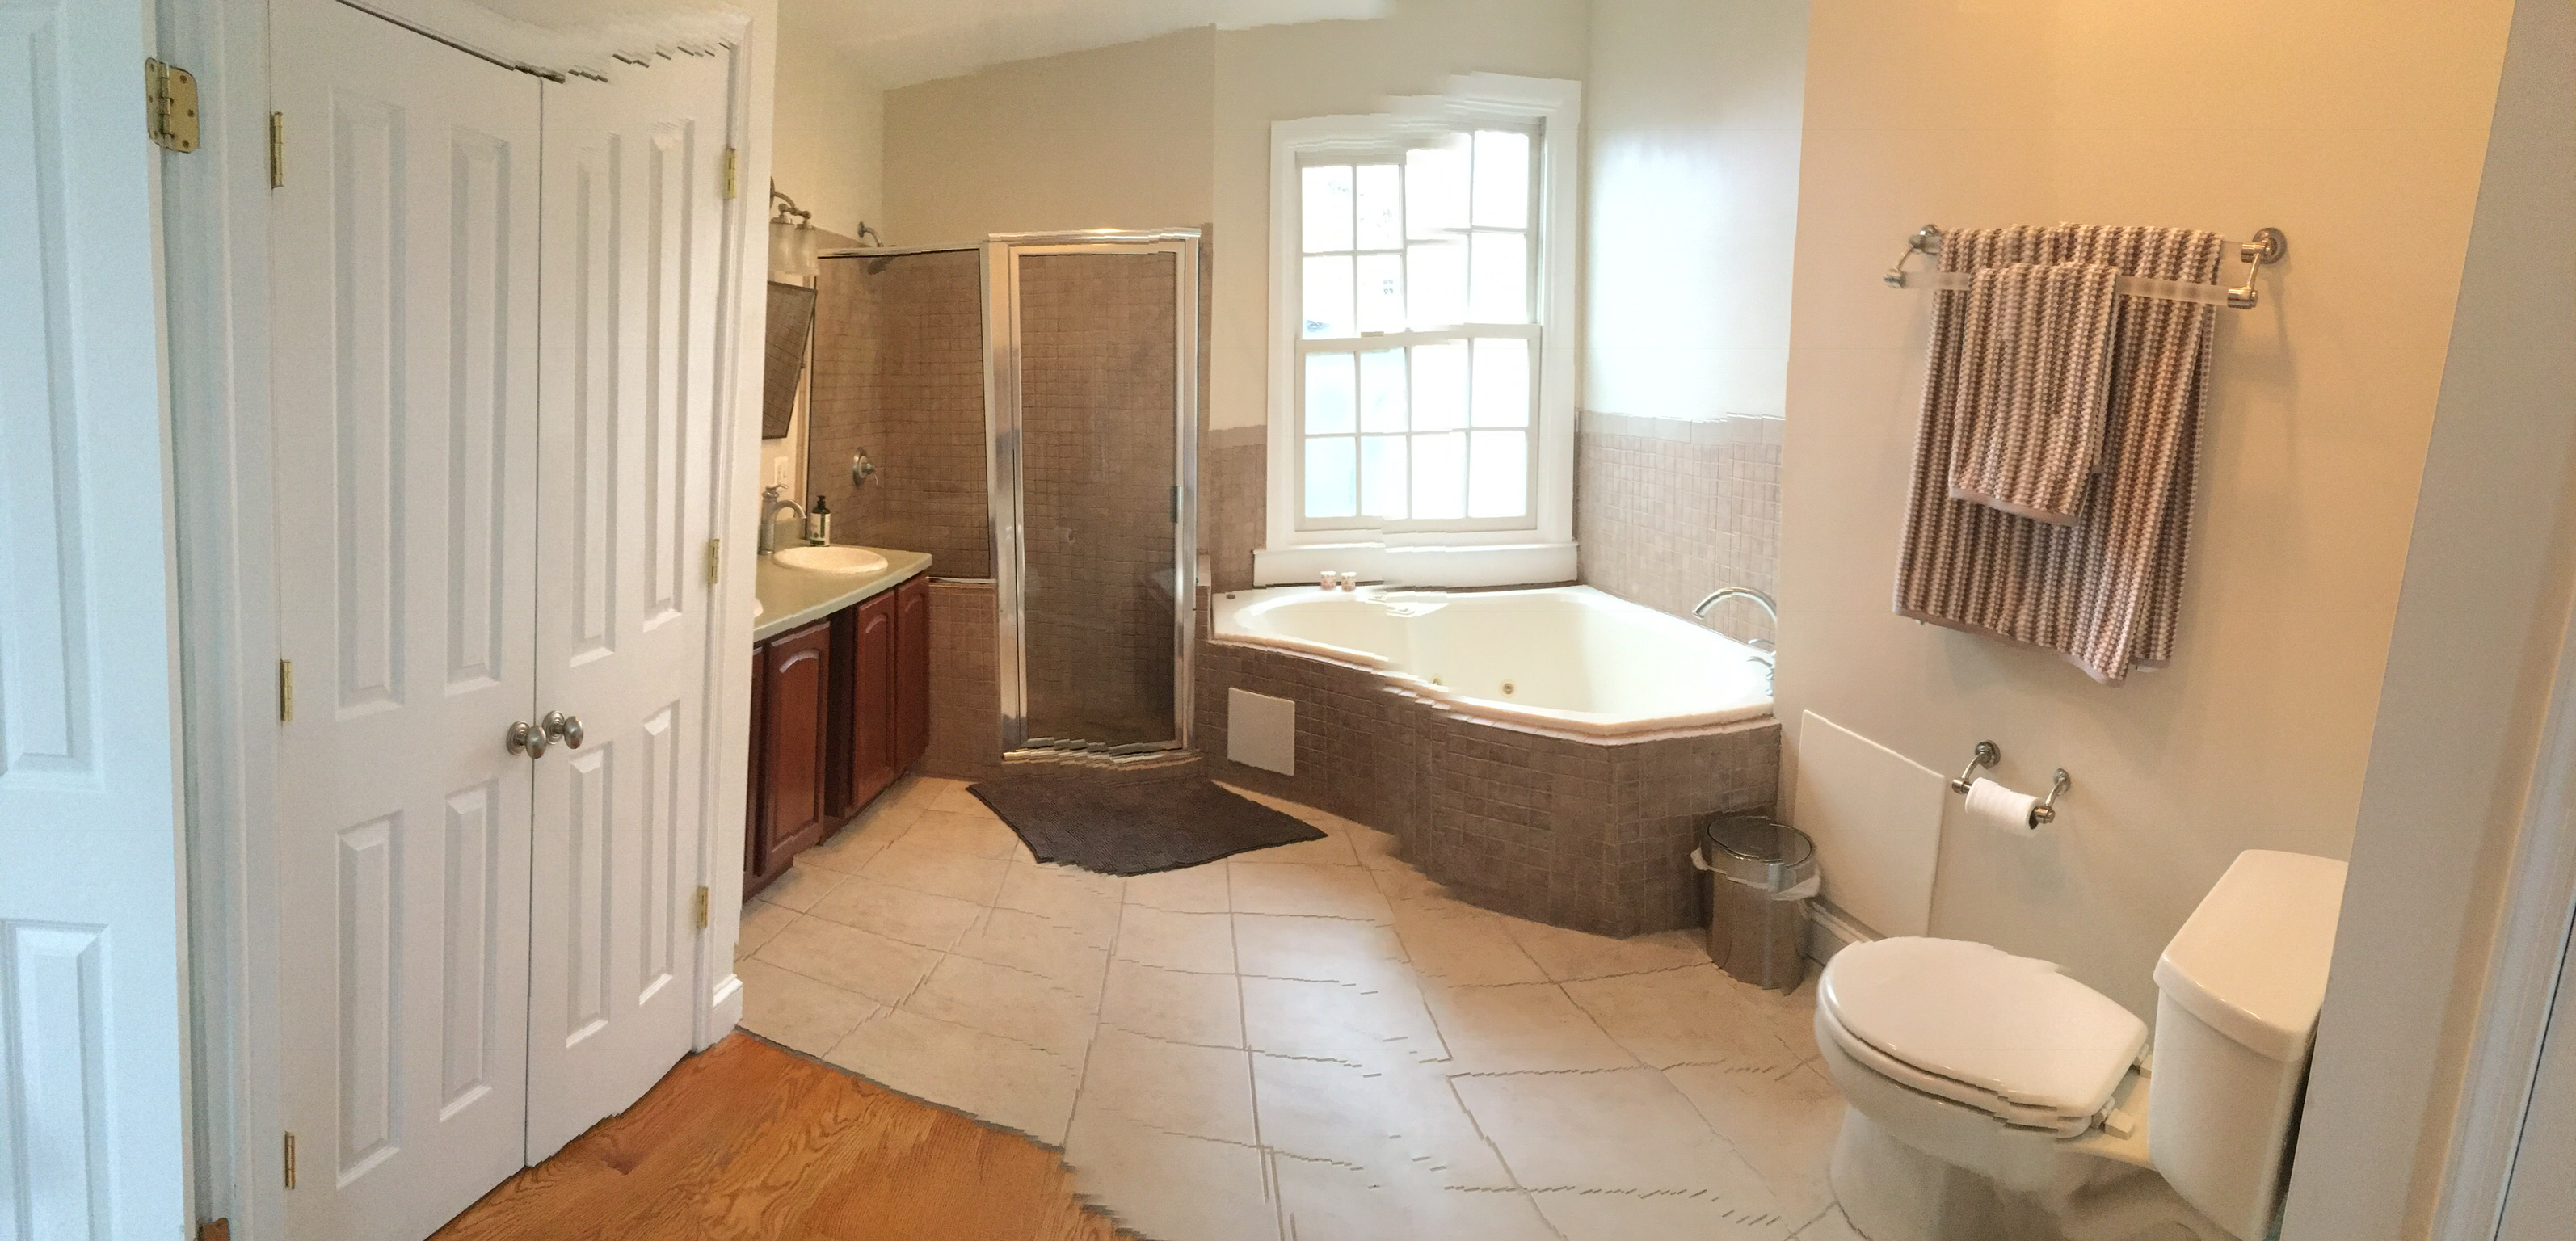 ❤️Couples Getaway❤️ Private 2ppl Jacuzzi Bubble Bath - Townhouses for Rent  in Baltimore, Maryland, United States